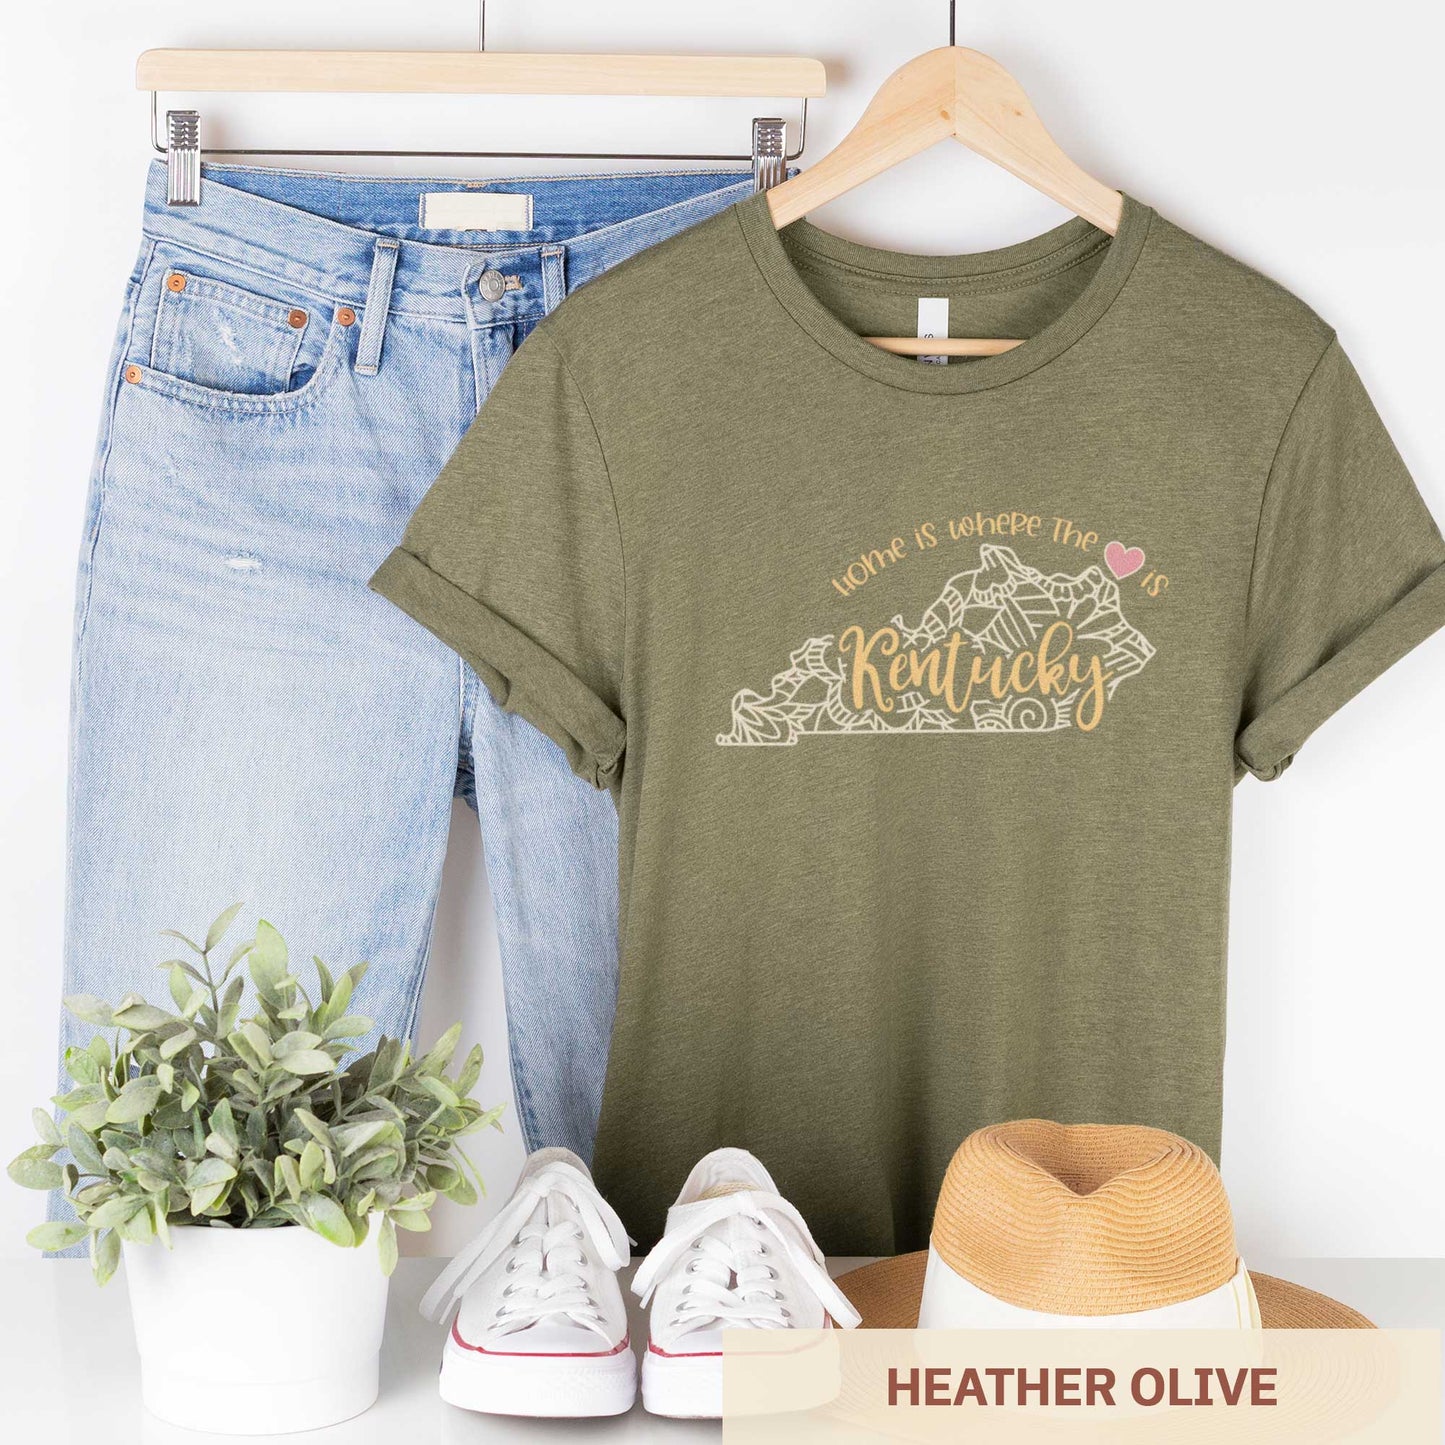 A hanging heather olive Bella Canvas t-shirt featuring a mandala in the shape of Kentucky with the words home is where the heart is.